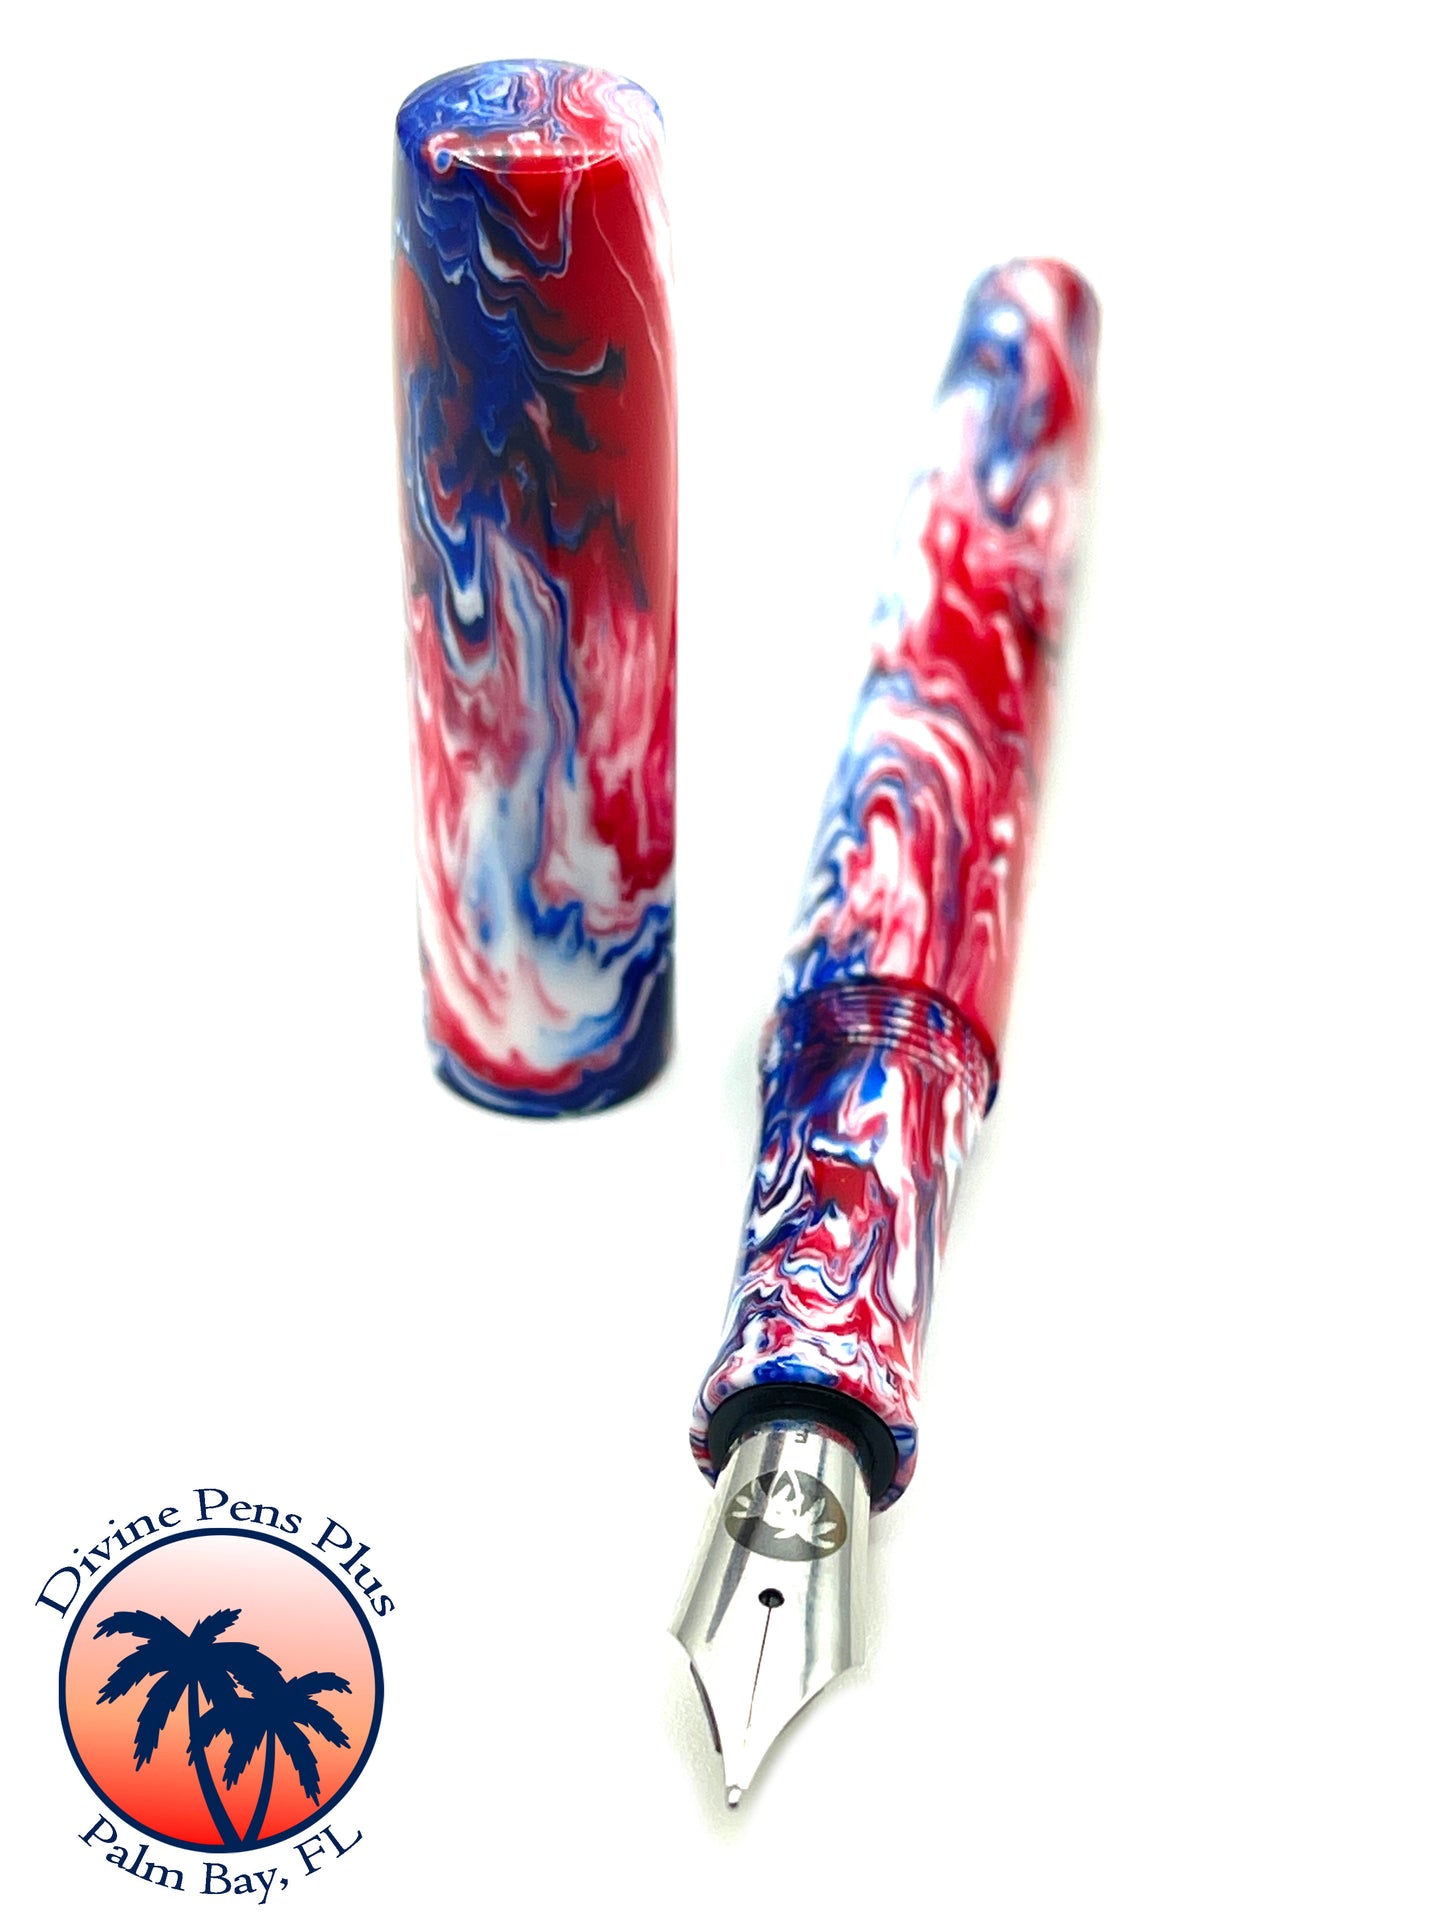 Caritas Fountain Pen - "Independence Day"